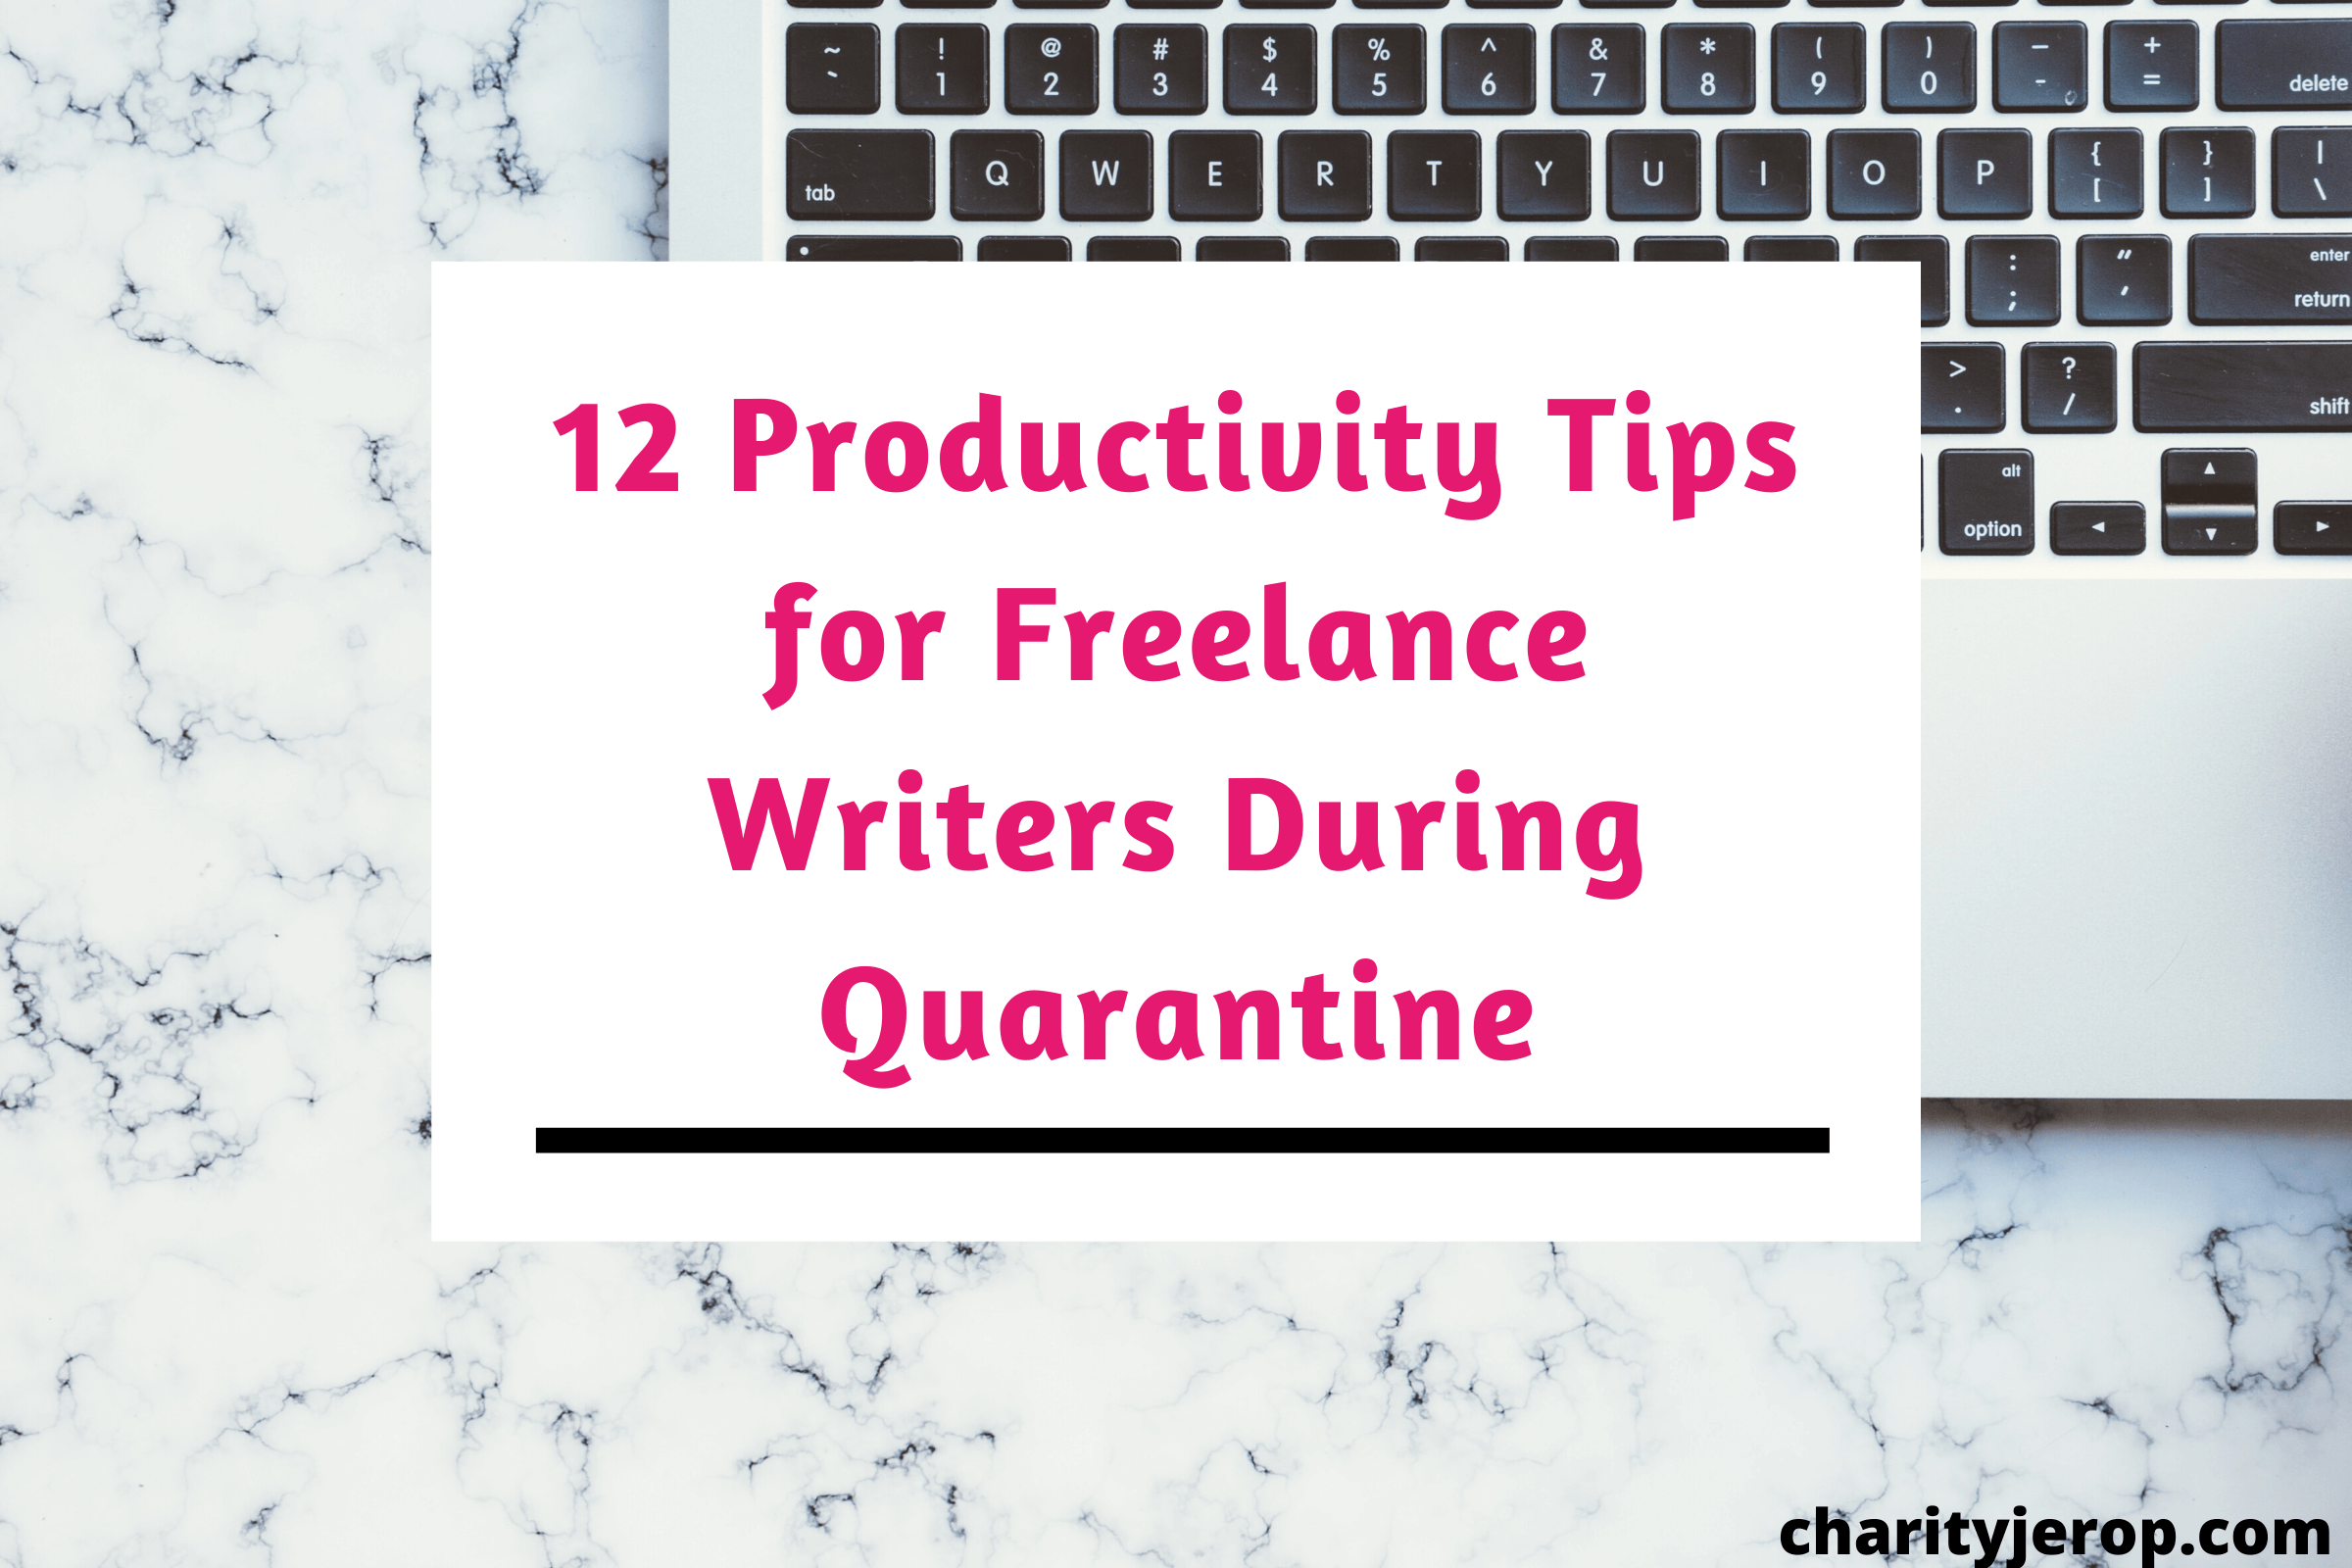 Productivity Tips: 12 Tips for Freelance Writers (During Quarantine)